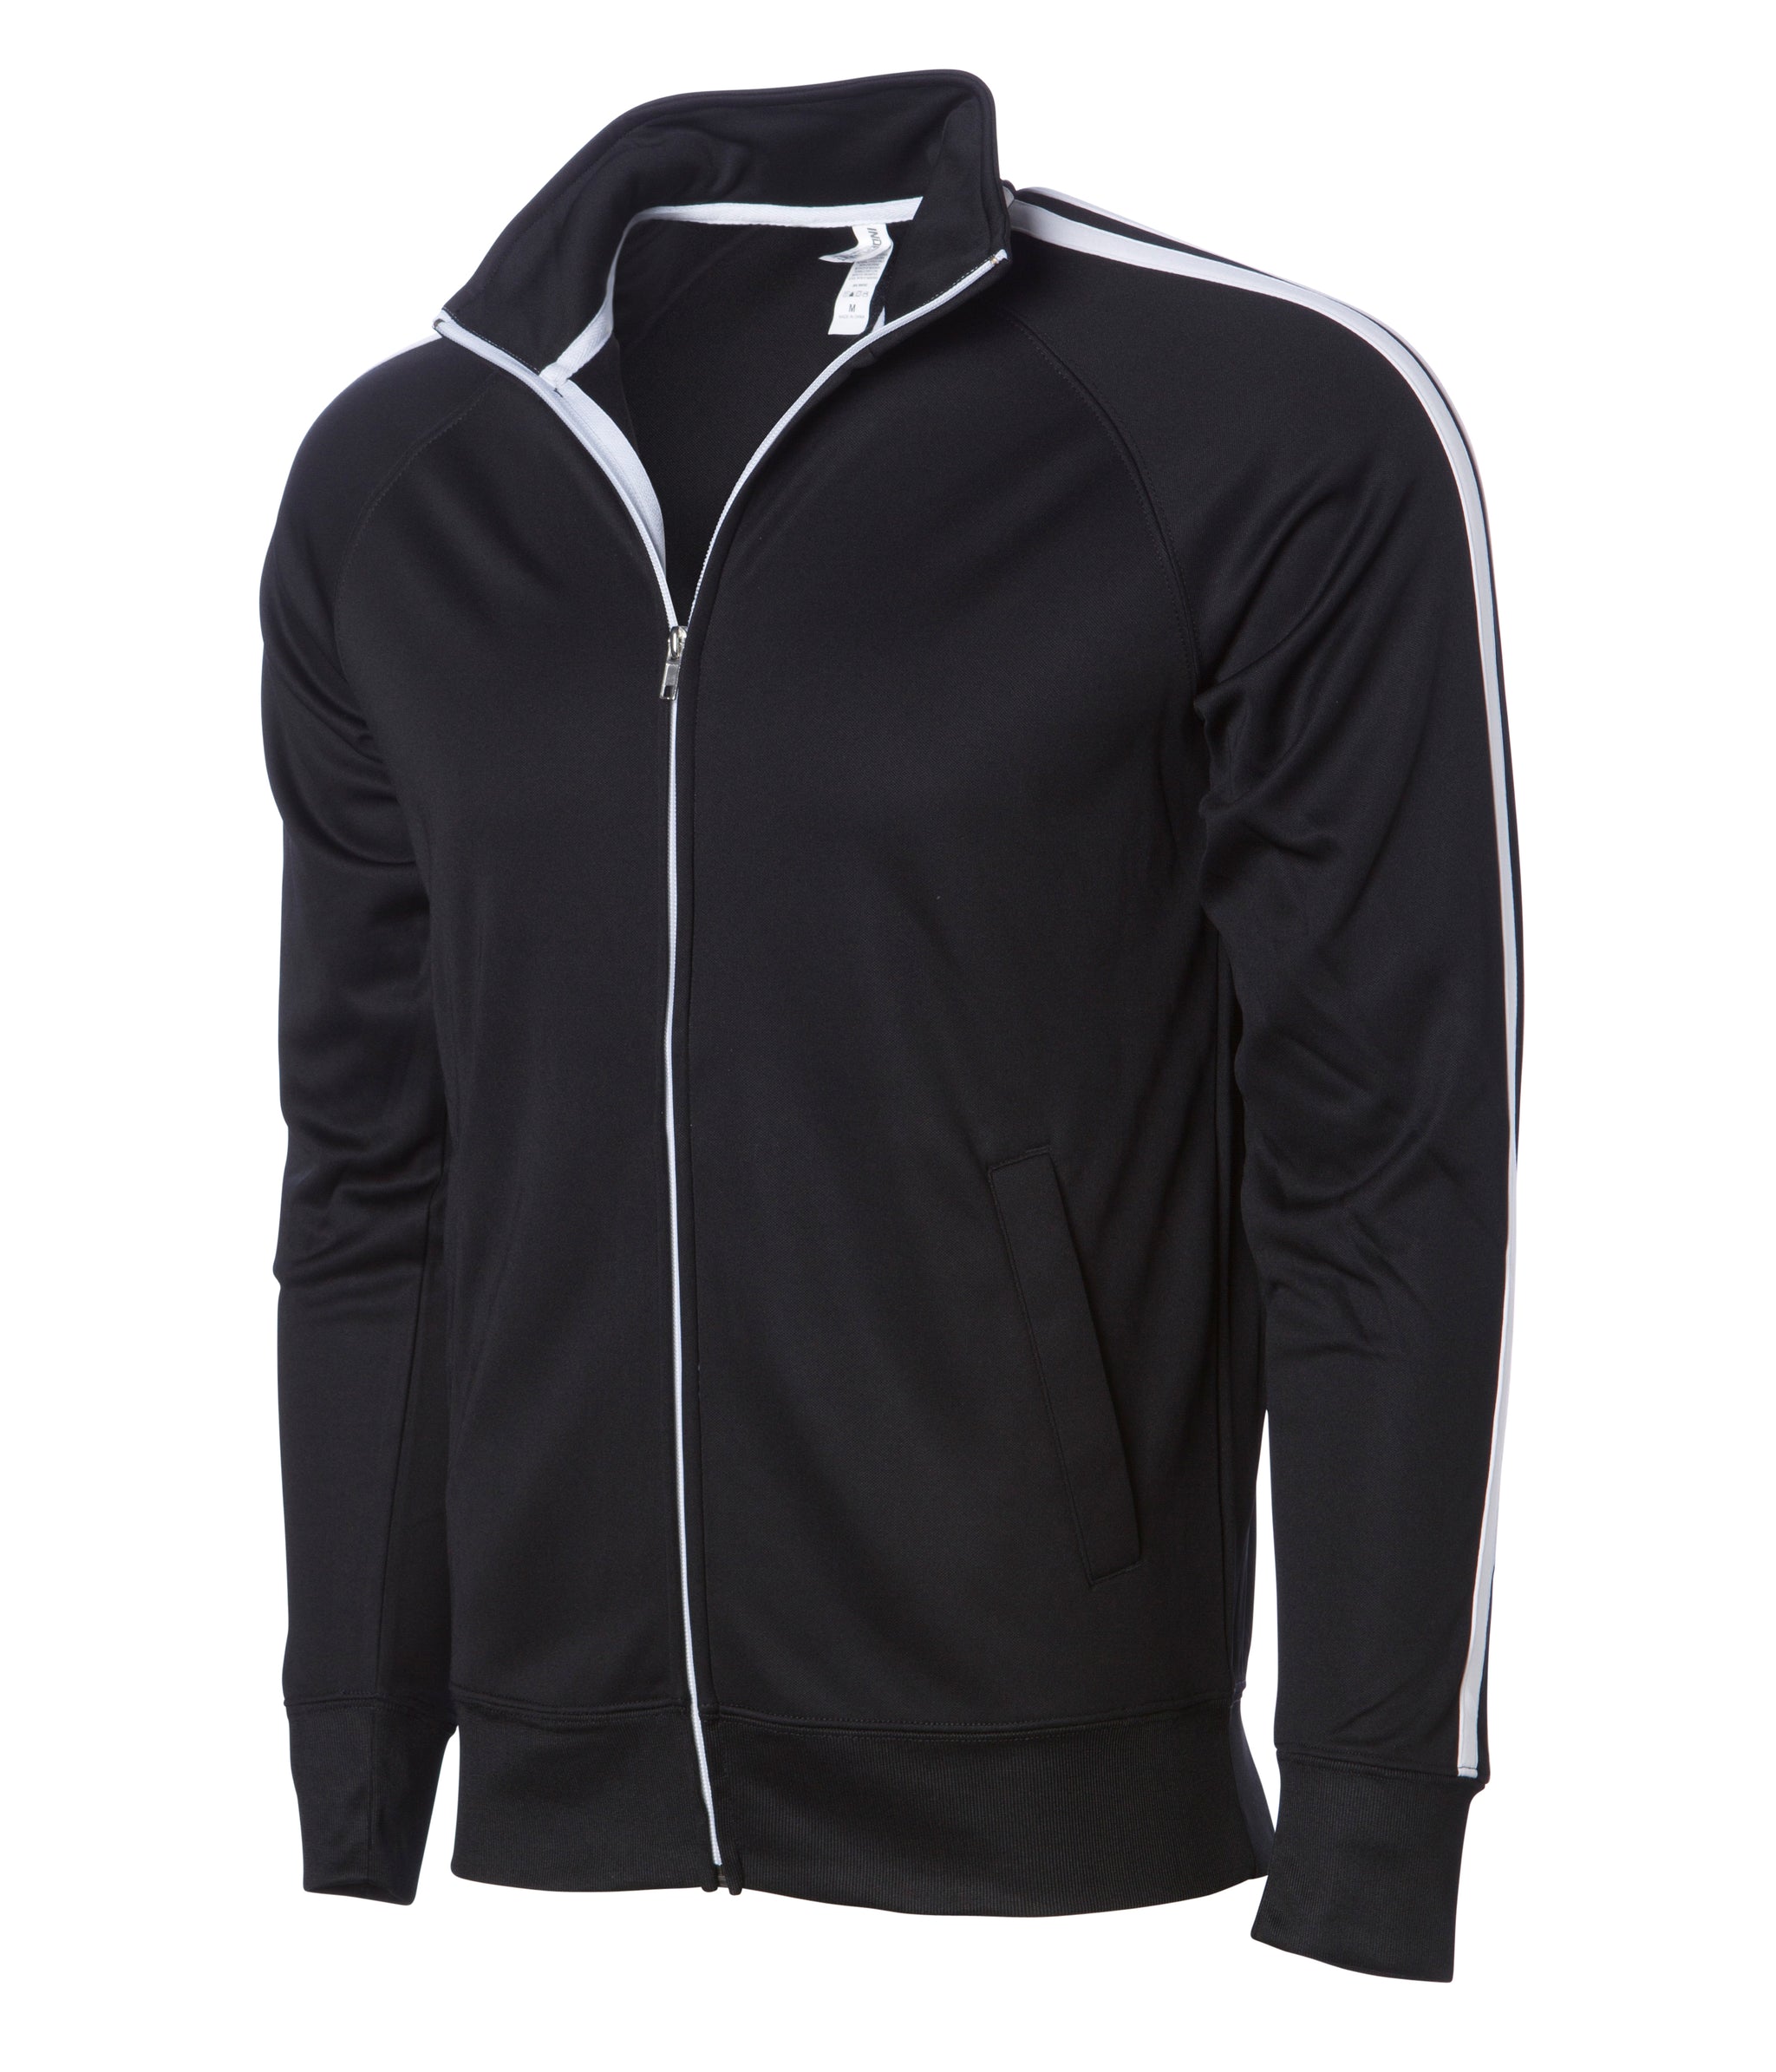 Unisex Lightweight Poly-Tech Track Jacket | Independent Trading Co ...